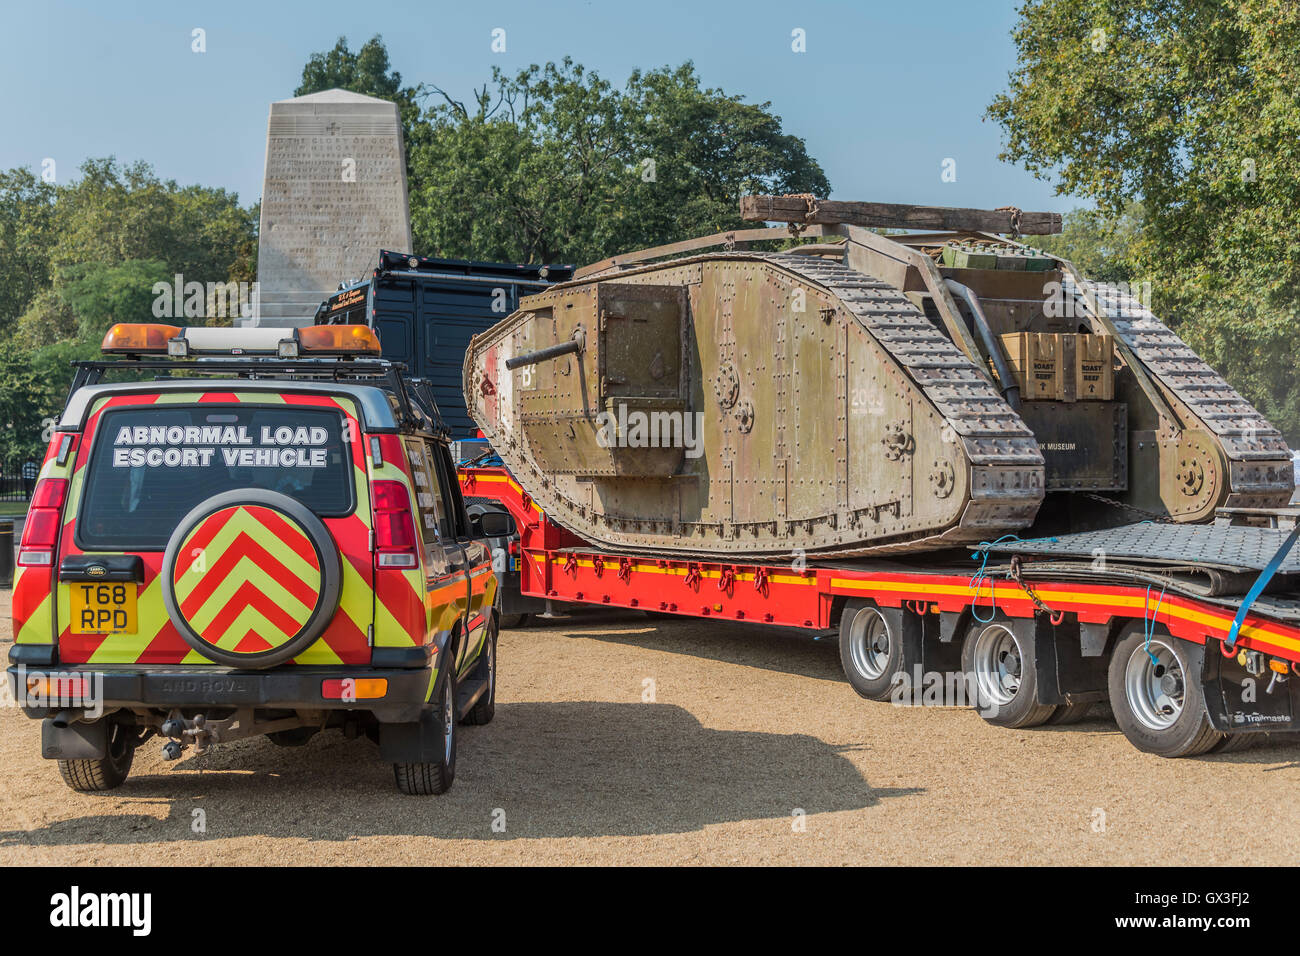 London, UK. 15th September, 2016. The tank is brought to Horse Guards Parade on a transporter on the short ride from Admiralty Arch to avoid damage to the road - A replica of a World War One tank brought to London to mark the 100th anniversary its first use in action in the Battle of the Somme on 15 September 1916. Dorset's Tank Museum, provided the machine which was designed to travel at walking pace (3mph) to support the infantry. Credit:  Guy Bell/Alamy Live News Stock Photo